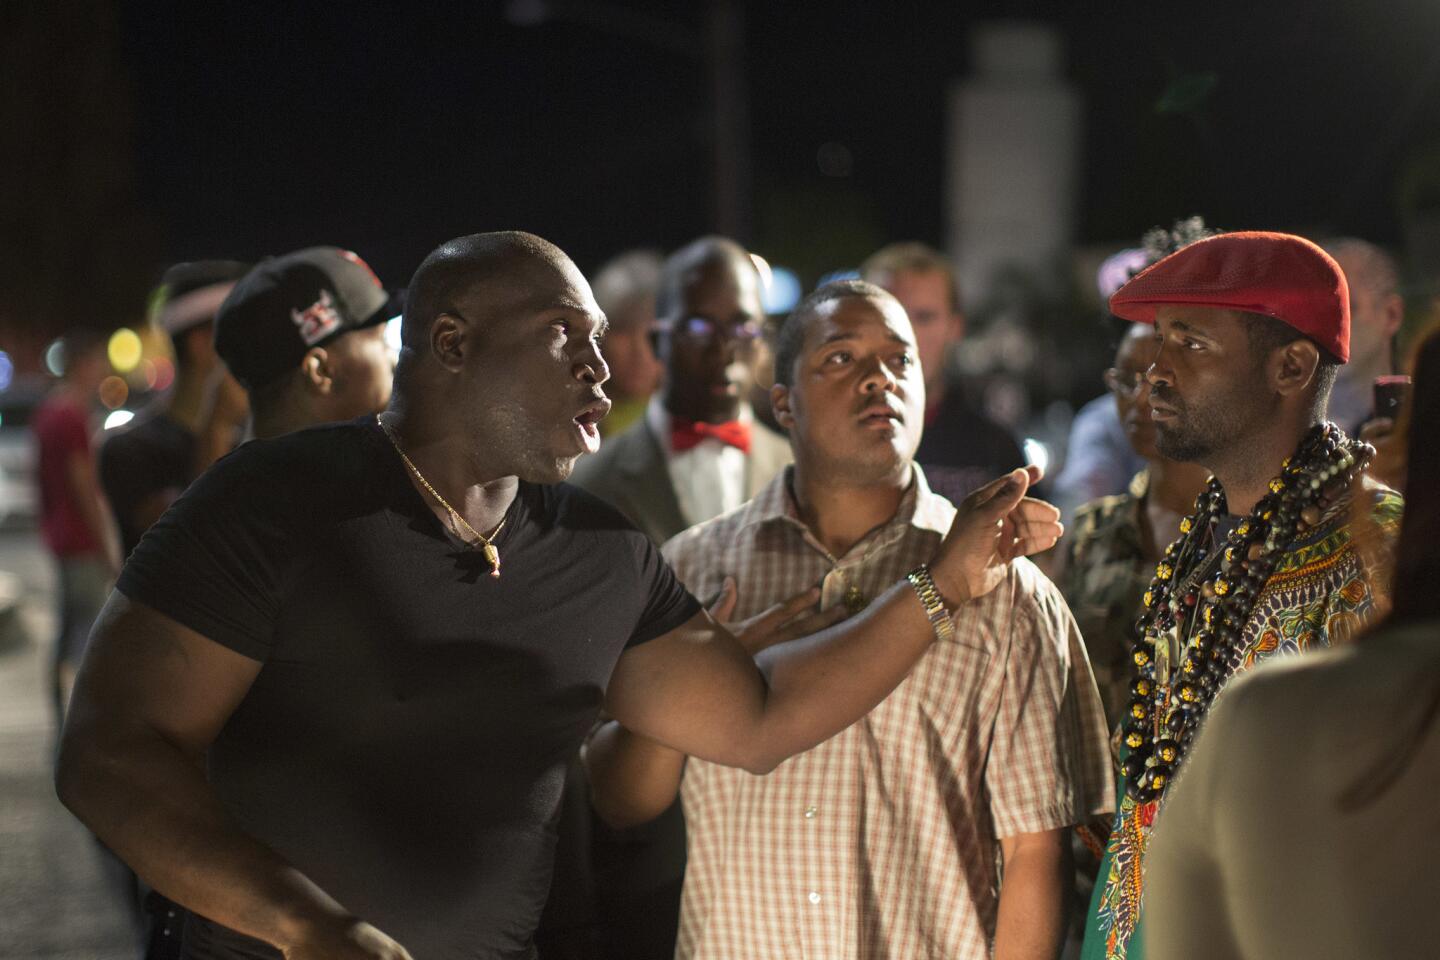 A driver, left, argues with protesters blocking an intersection near the site where Alfred Olango had been shot by police earlier this week in El Cajon.